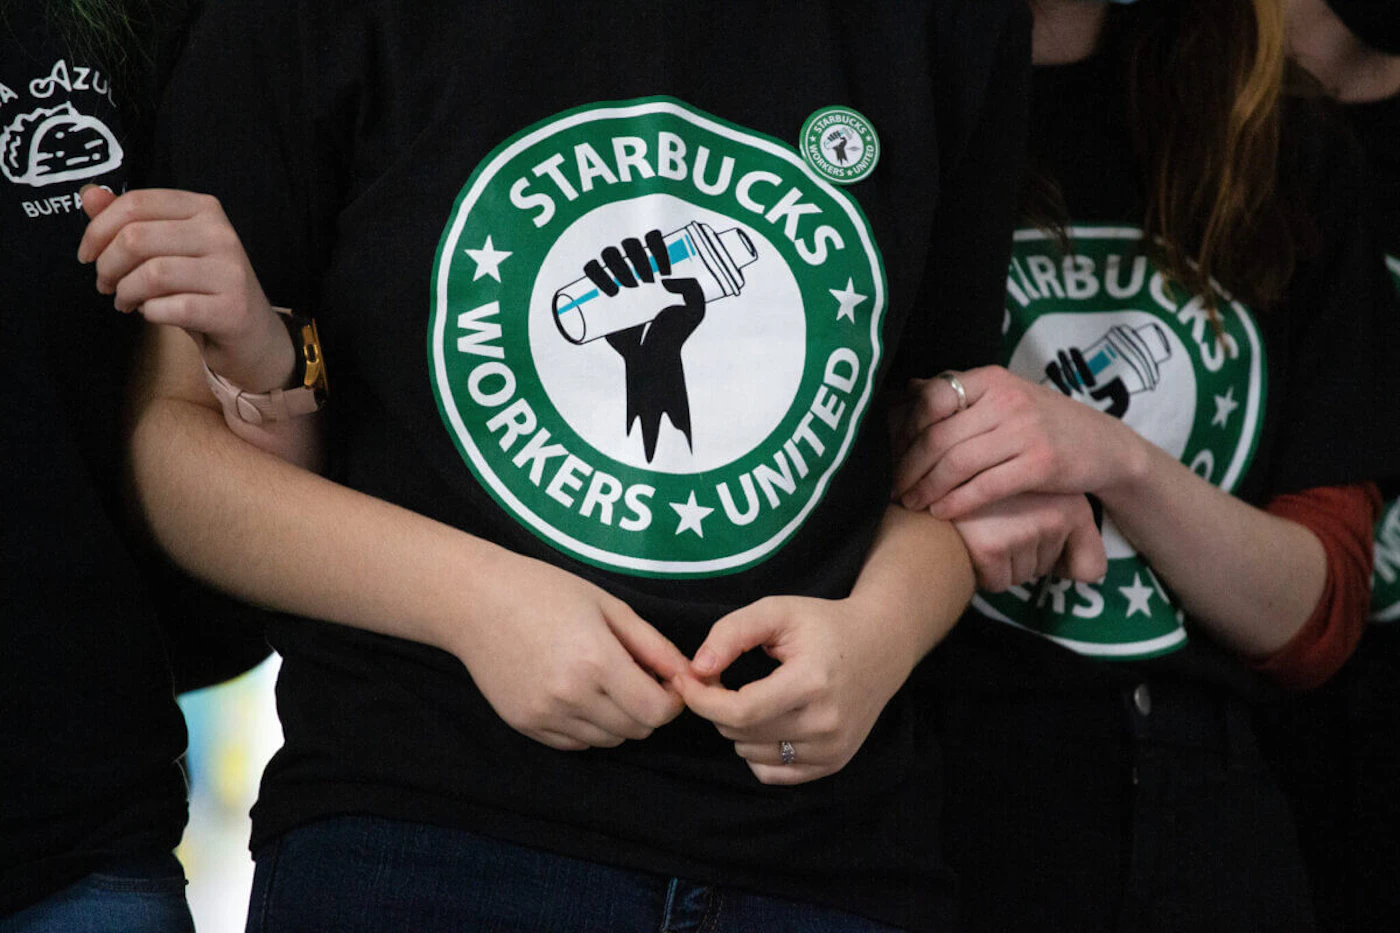 Starbucks employees and supporters react as votes are read during a union-election watch party in New York in 2021. The labor movement at the coffee giant is gaining steam in the U.S. Workers at a Boone location became the first Starbucks location to unionize in NC in May. (AP Photo/Joshua Bessex, File)